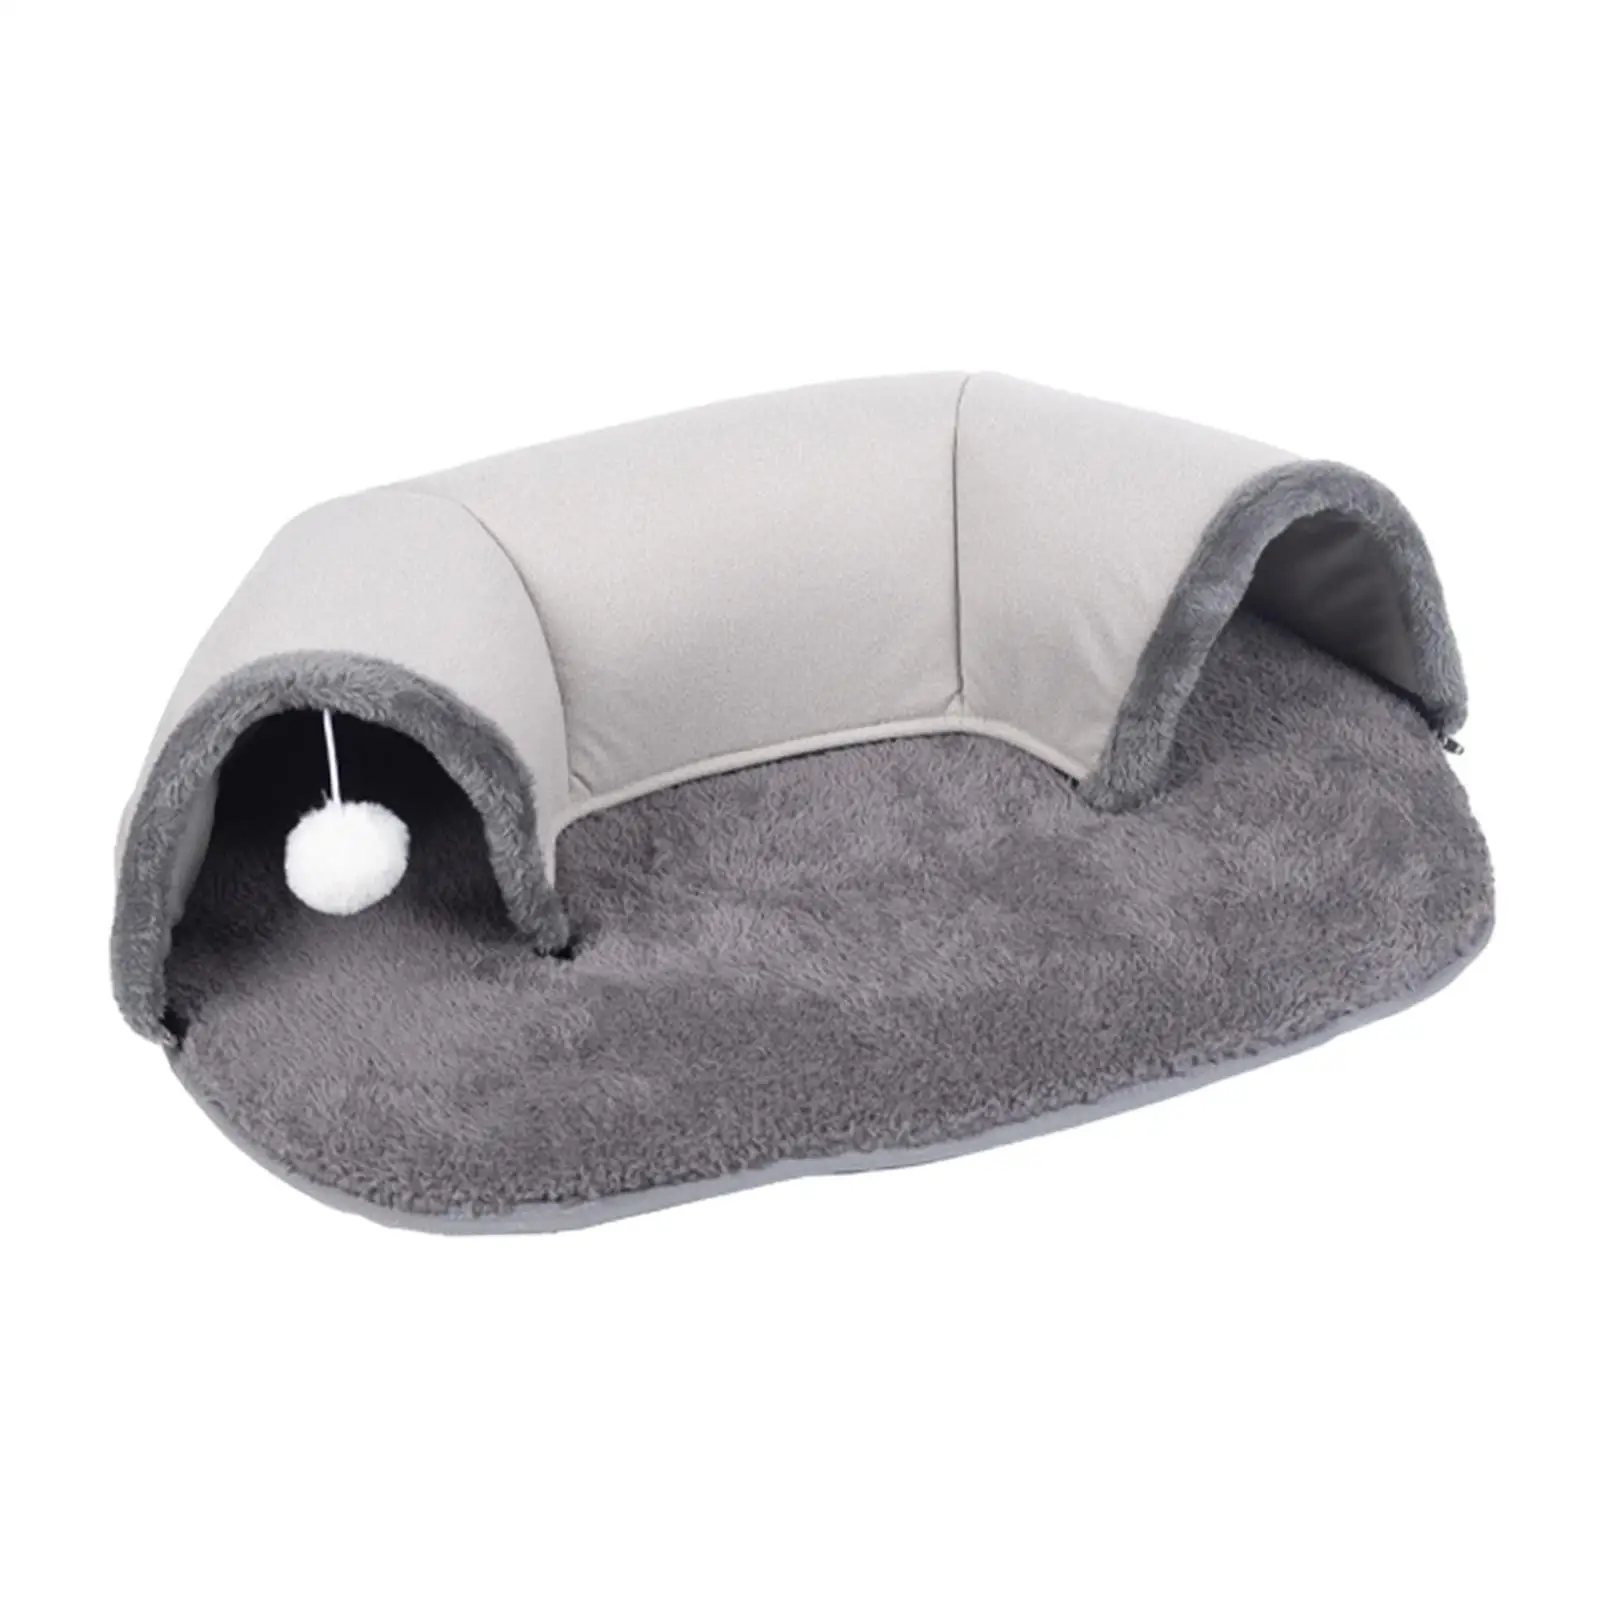 Cat Tunnel and Bed Toy Washable Multifunctional Anti Slip Bottom Plush for Kitten Puppy 65x49x17cm with Toy Ball Fun Exercise